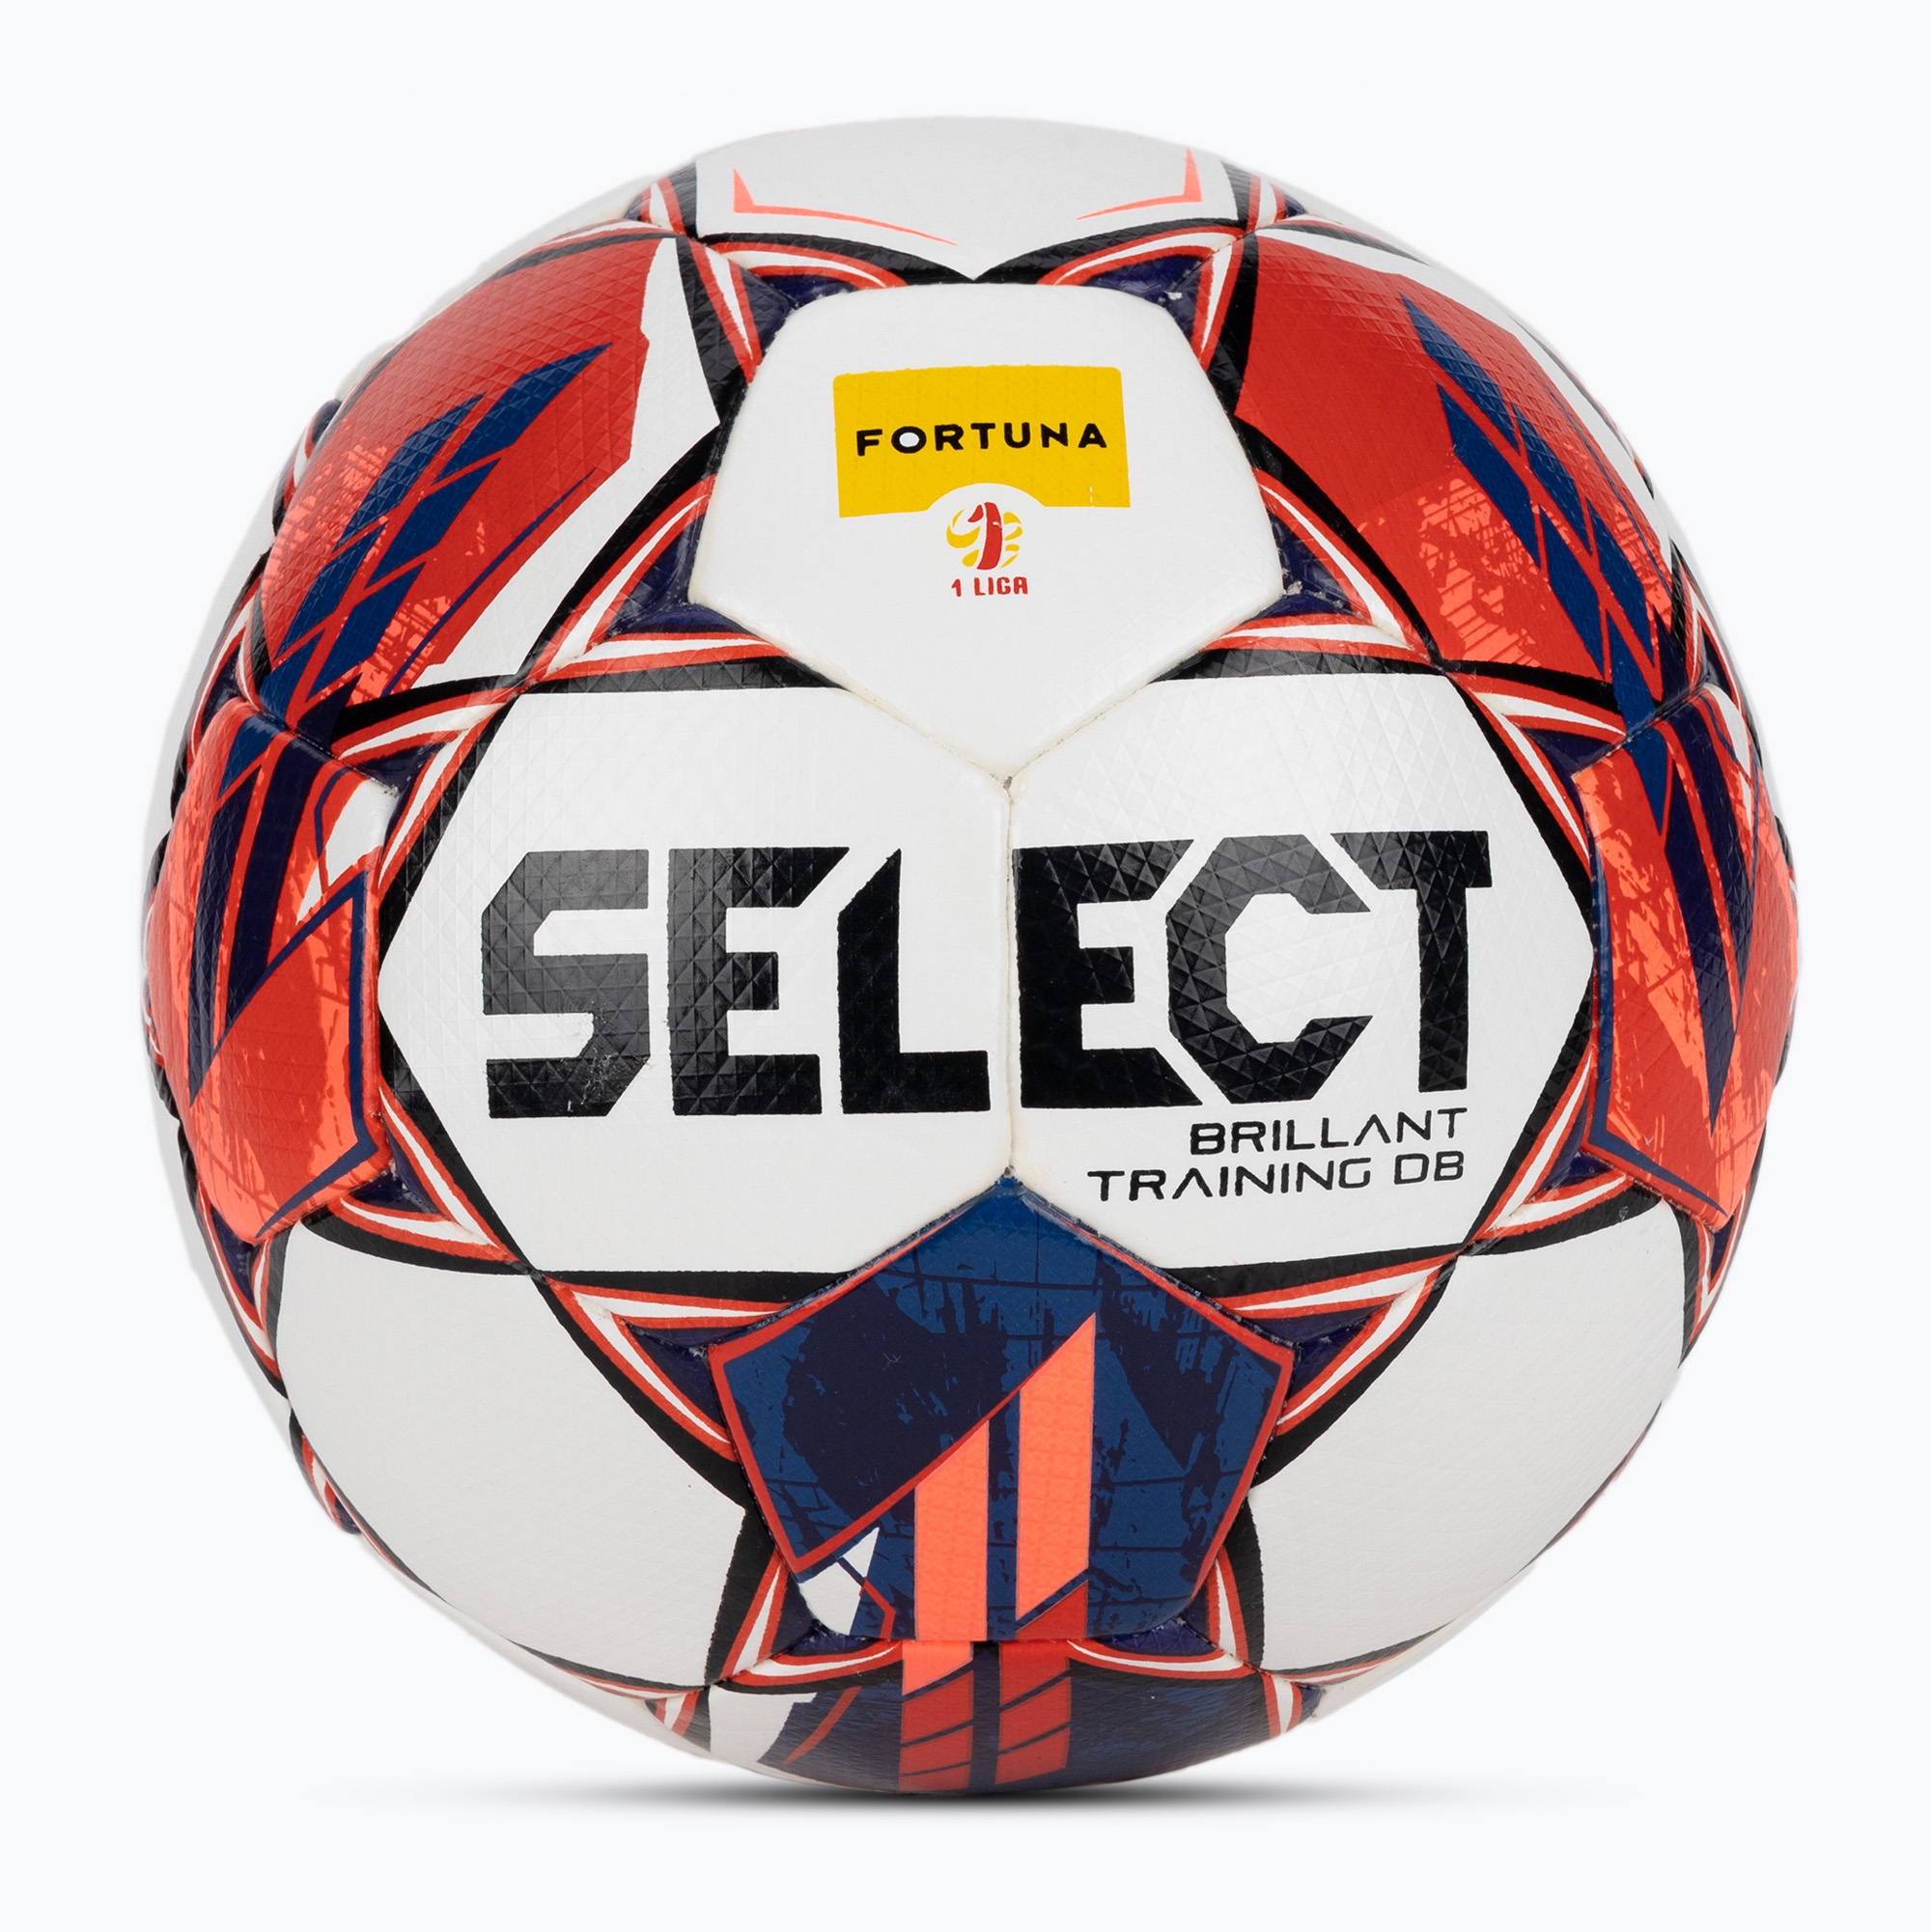 SELECT Brillant Training Fortuna 1 League football v23 white/red size 5